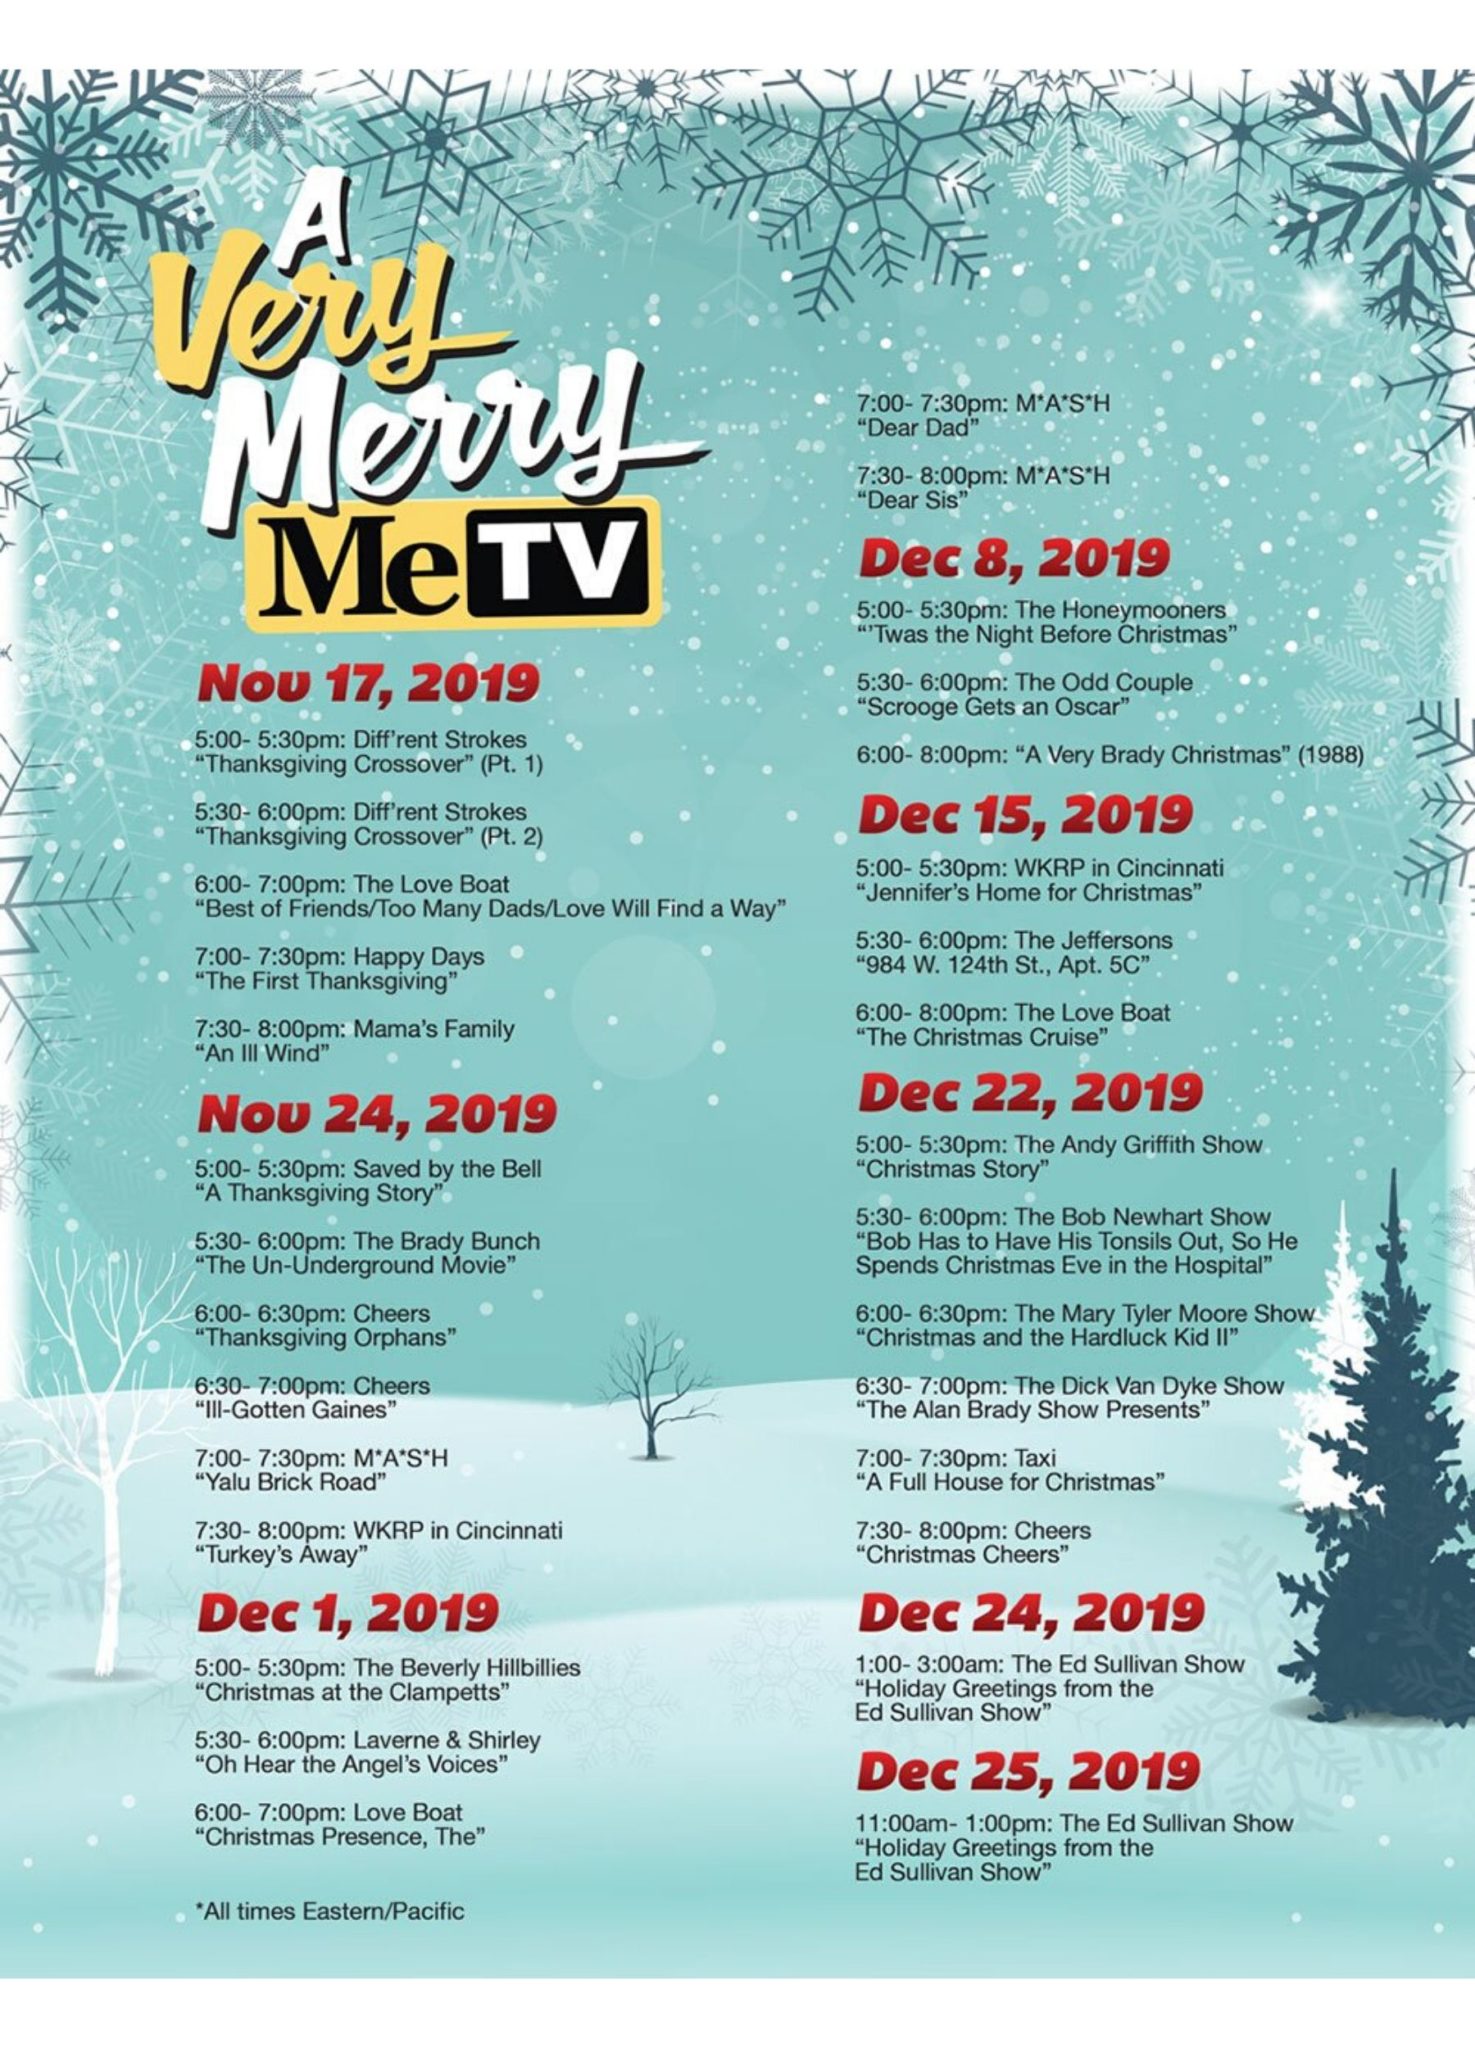 MeTV is Airing Classic Holiday Episodes For Free all Through Christmas | Cord Cutters News